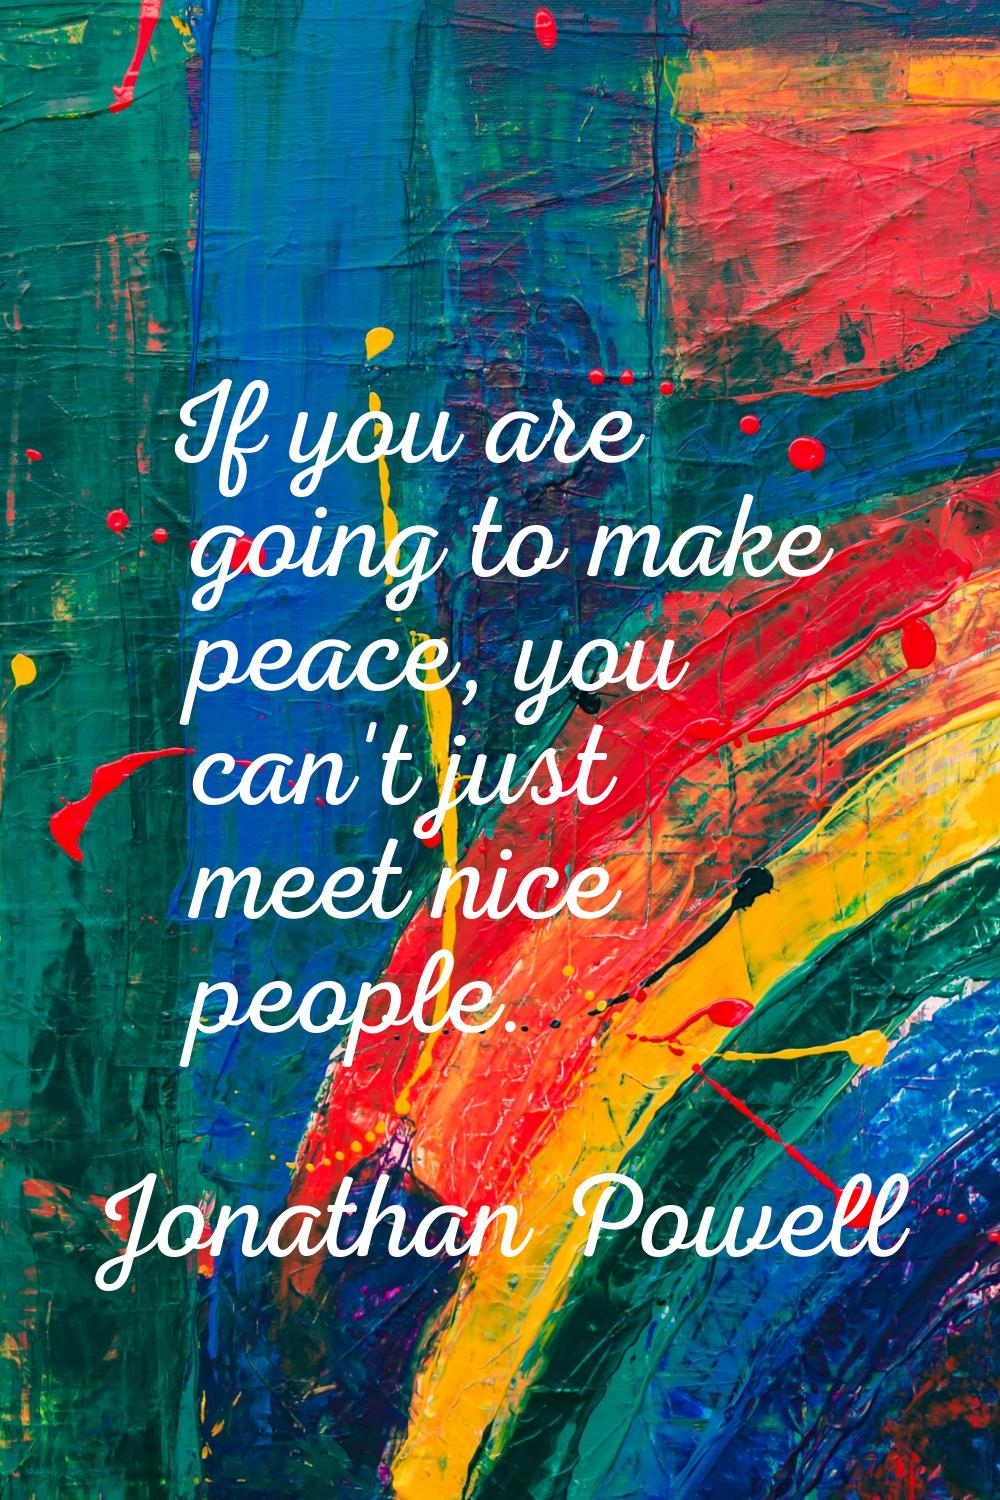 If you are going to make peace, you can't just meet nice people.